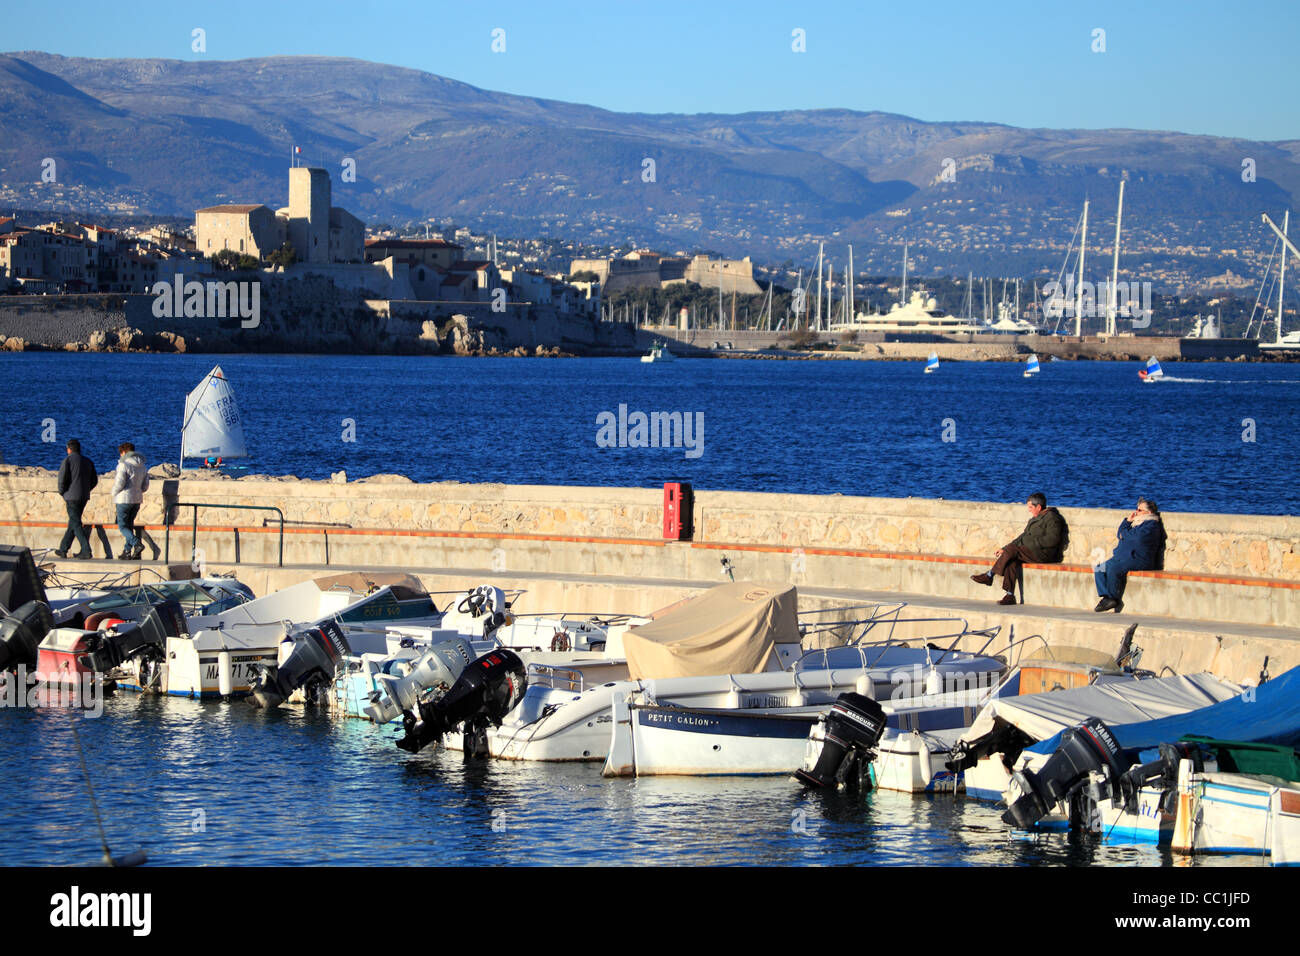 The city of Antibes with the Vauban rampart Stock Photo